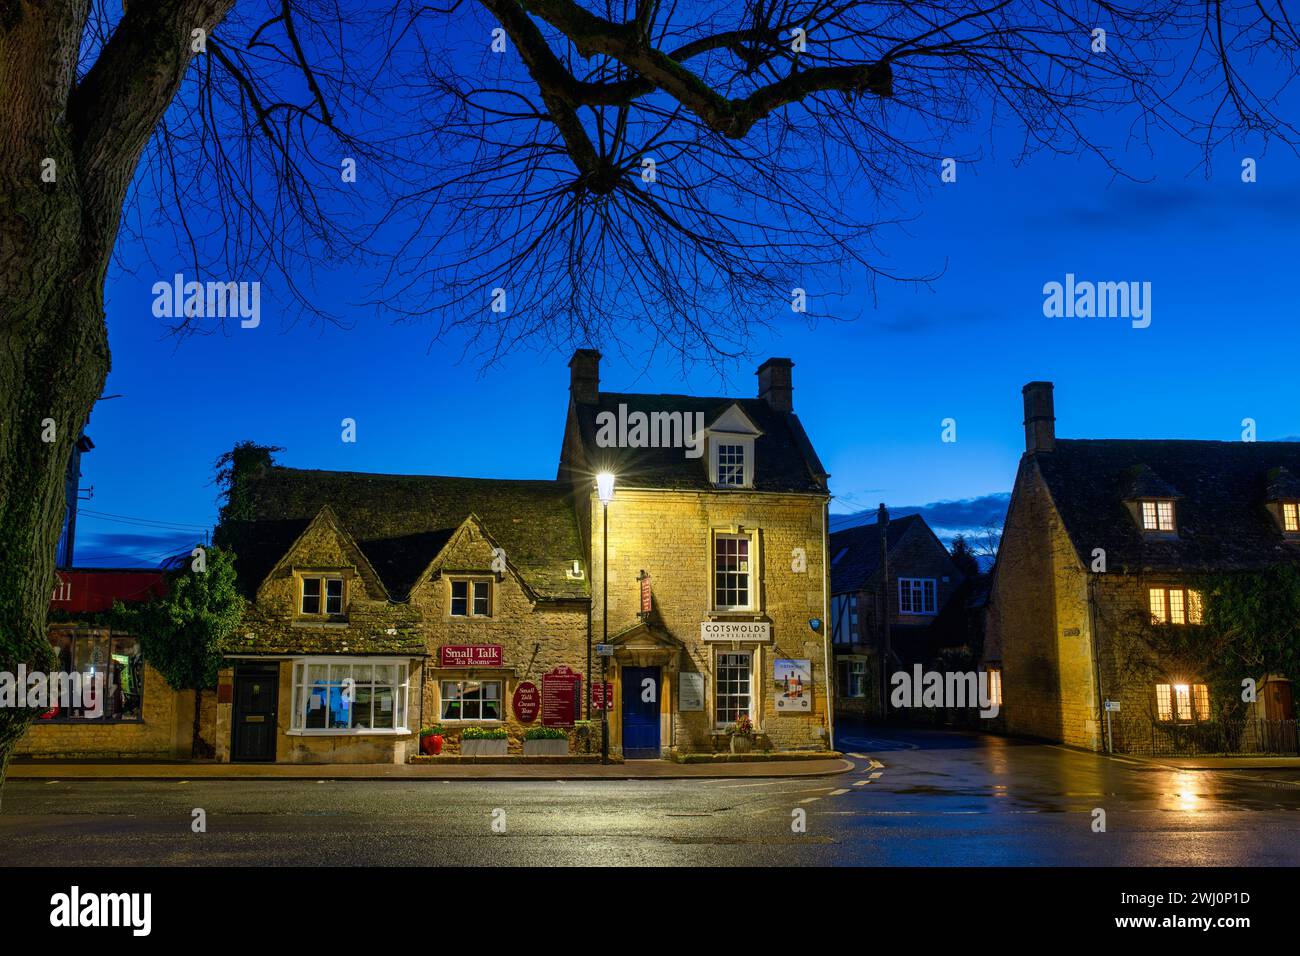 The Cotswolds Distillery at Dawn. Bourton on the Water, Cotswolds, Gloucestershire, England Stock Photo